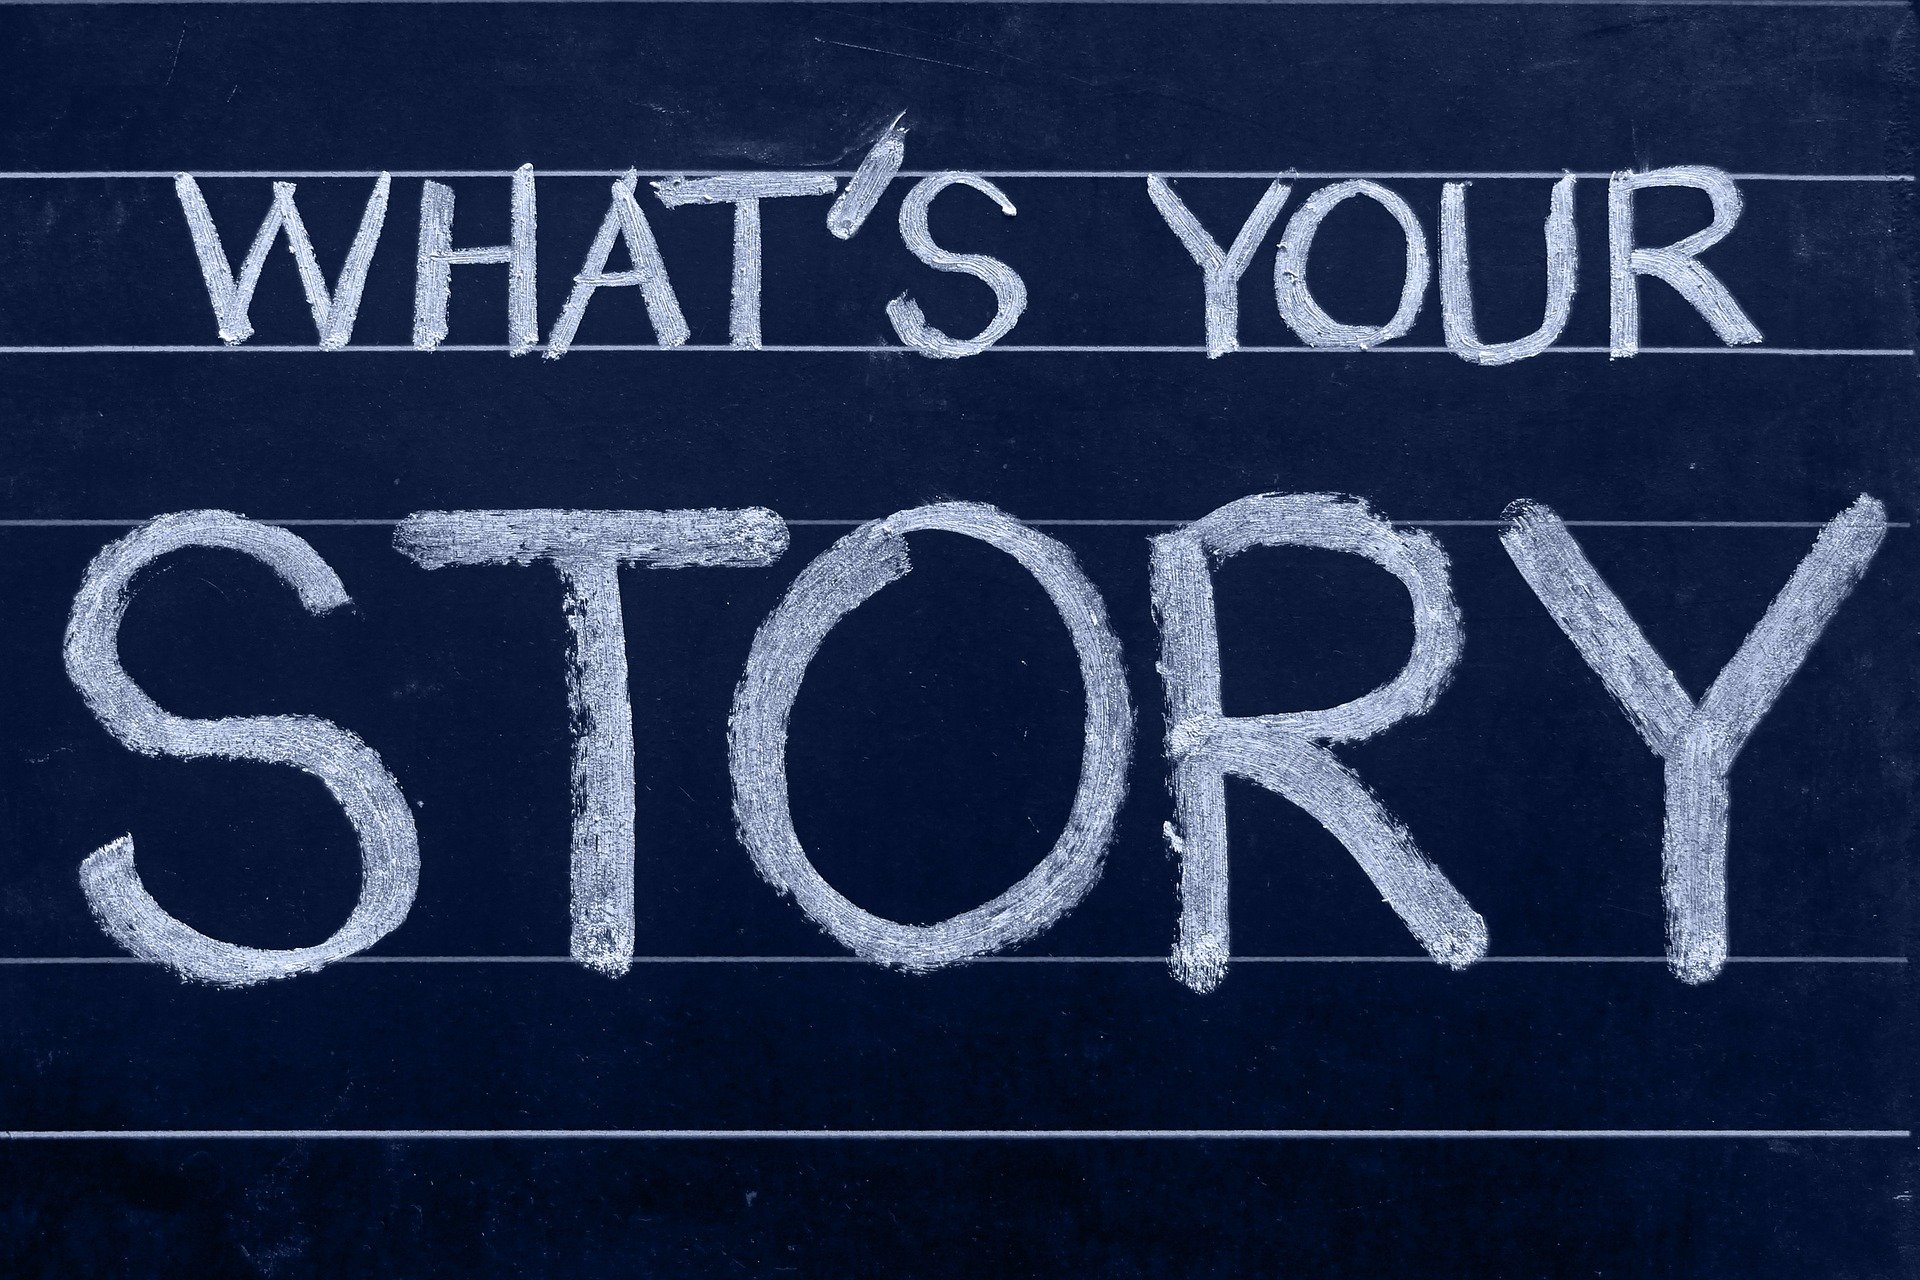 Improve your SEO by being nosy. What's your story?